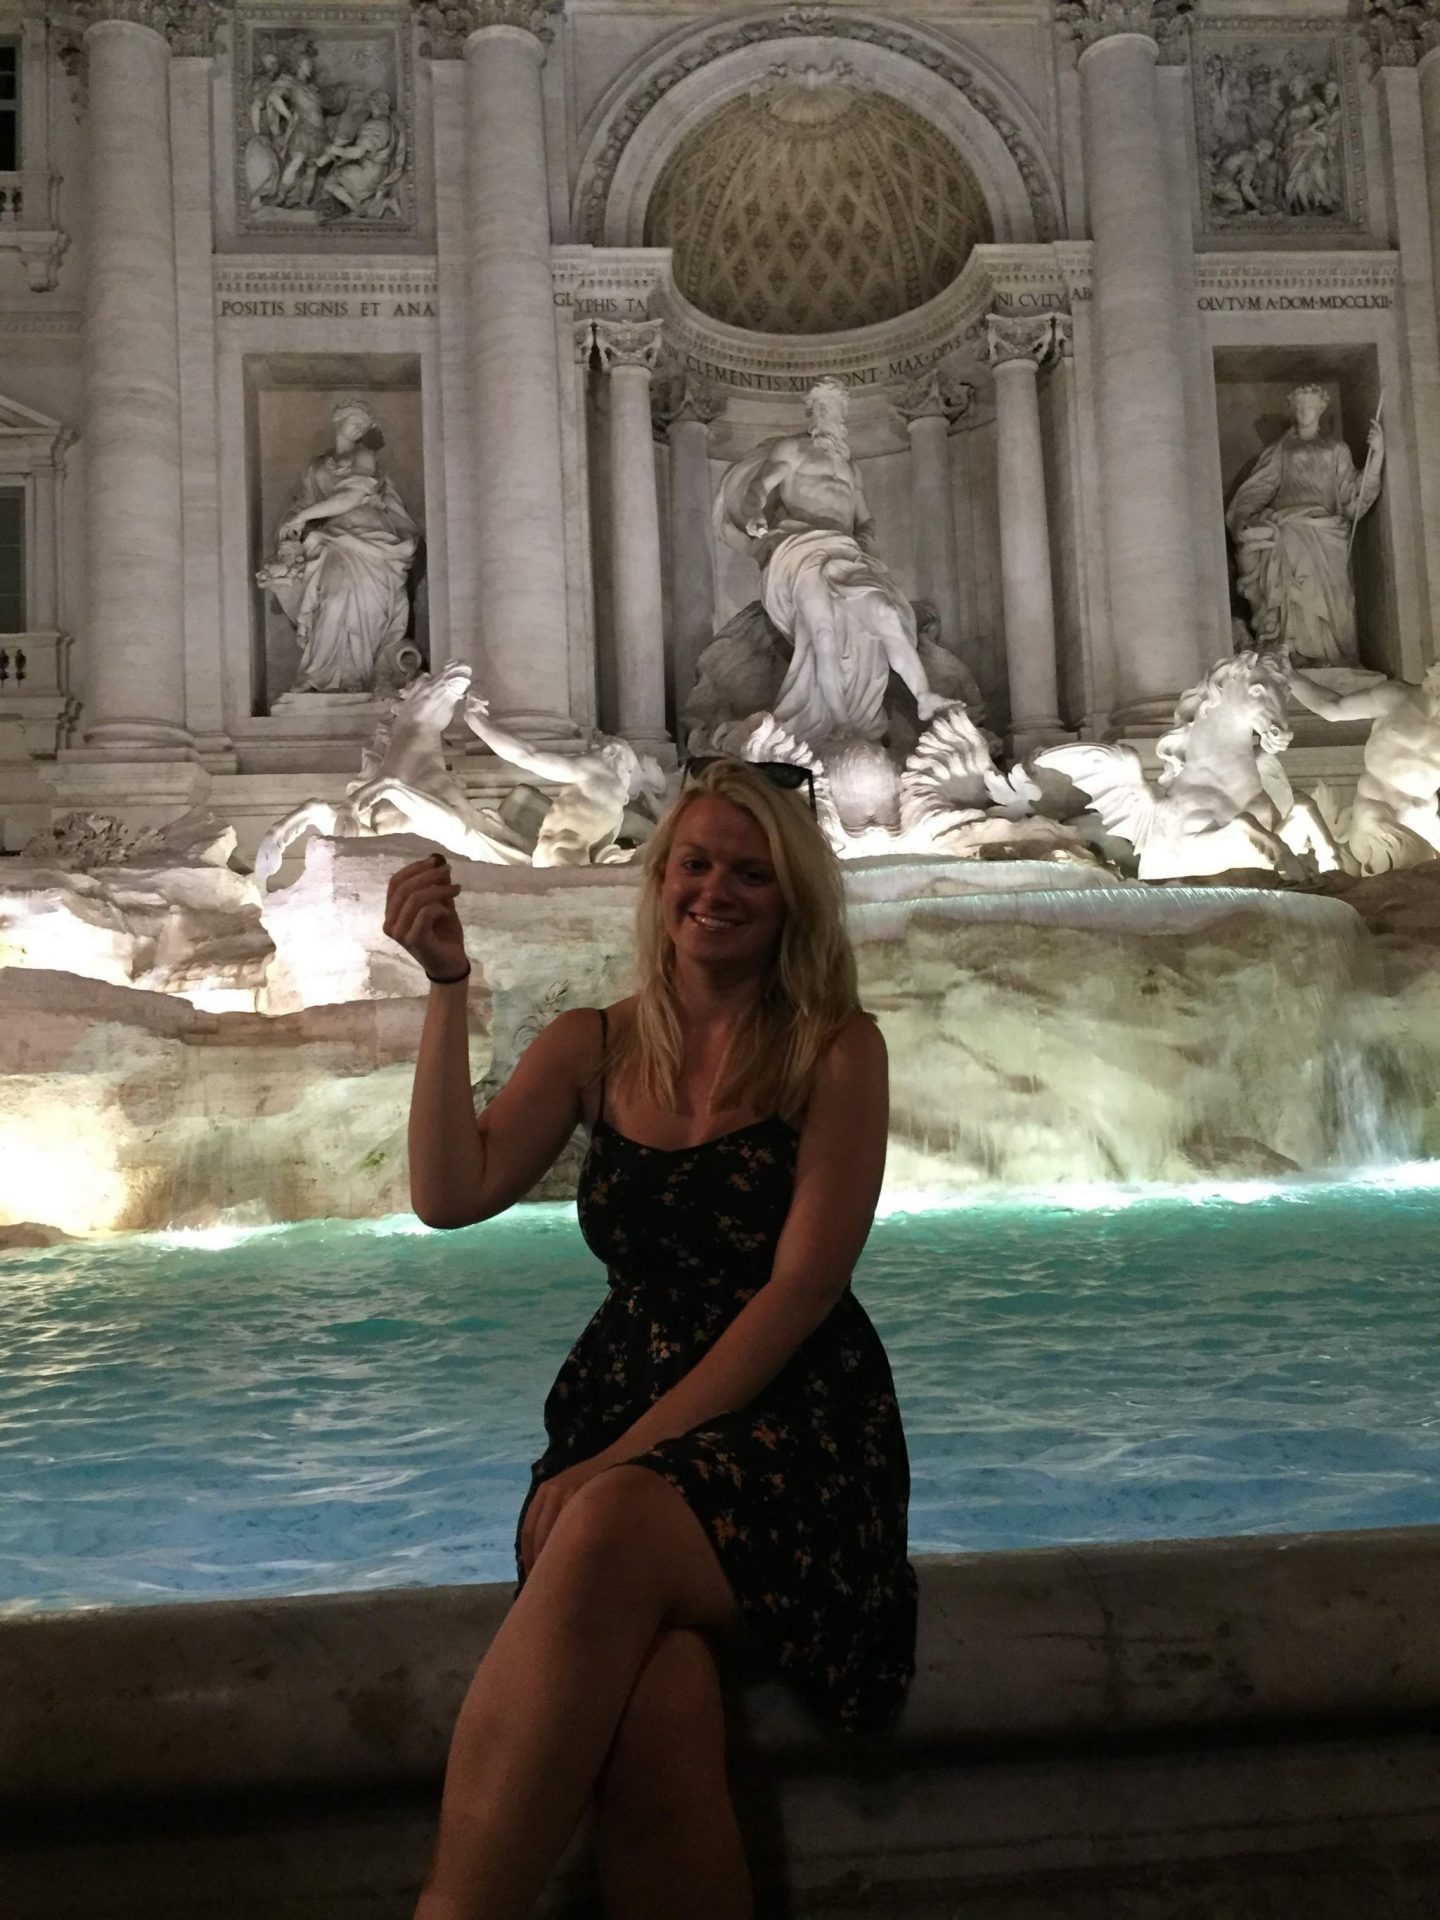 Laura at the Trevi Fountain